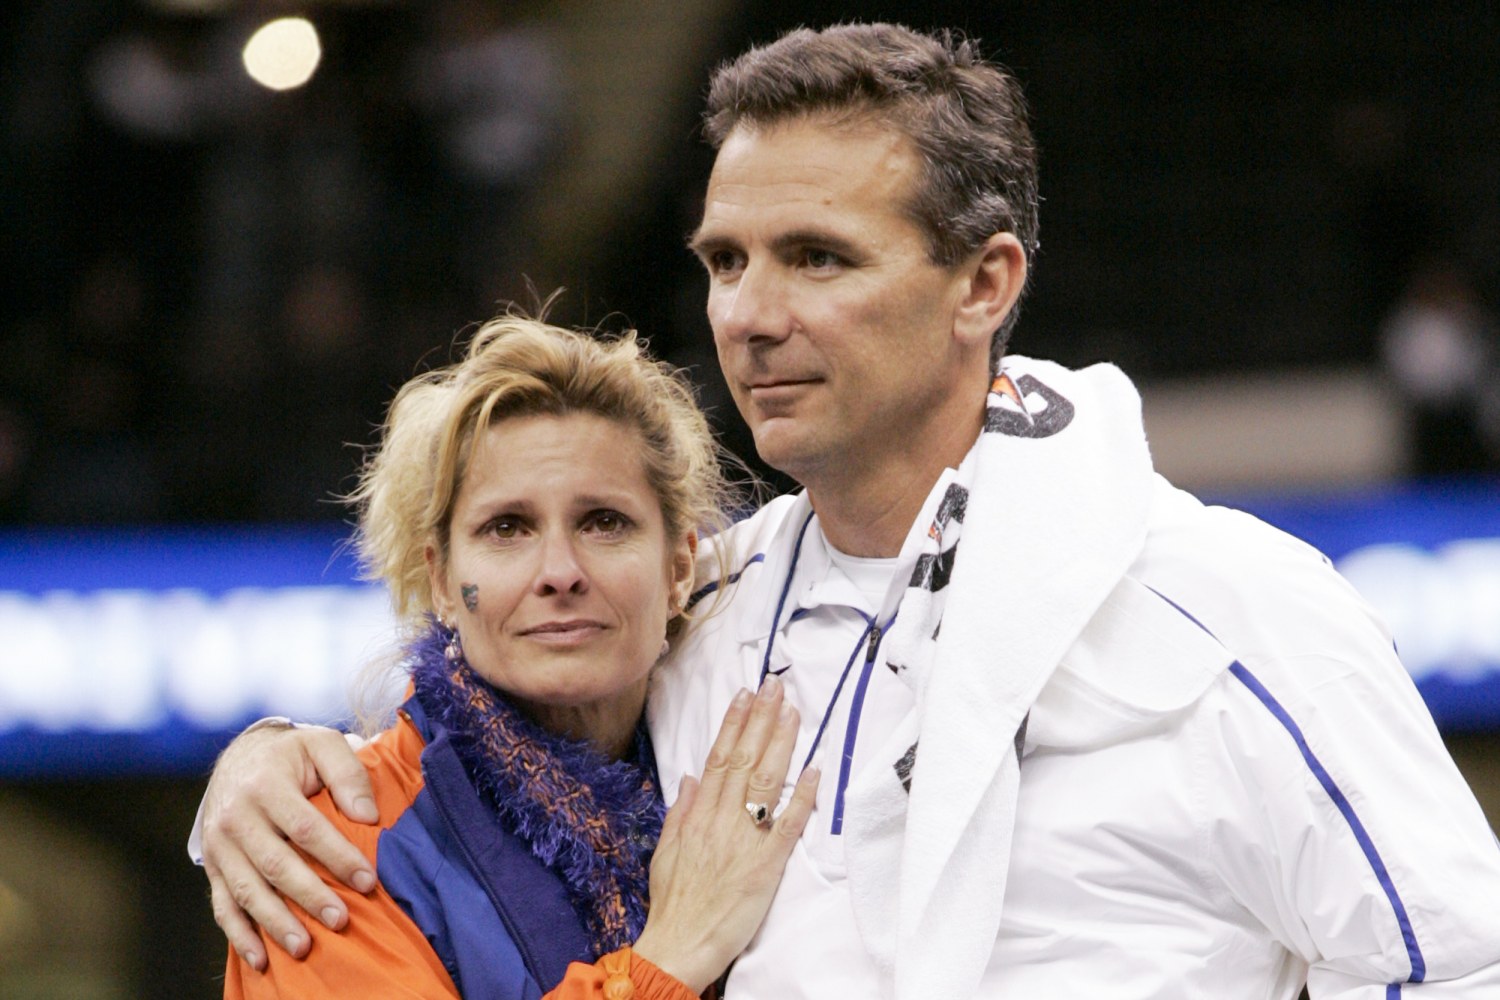 We are all sinners': Urban Meyer's wife addresses video of NFL coach at  Ohio bar